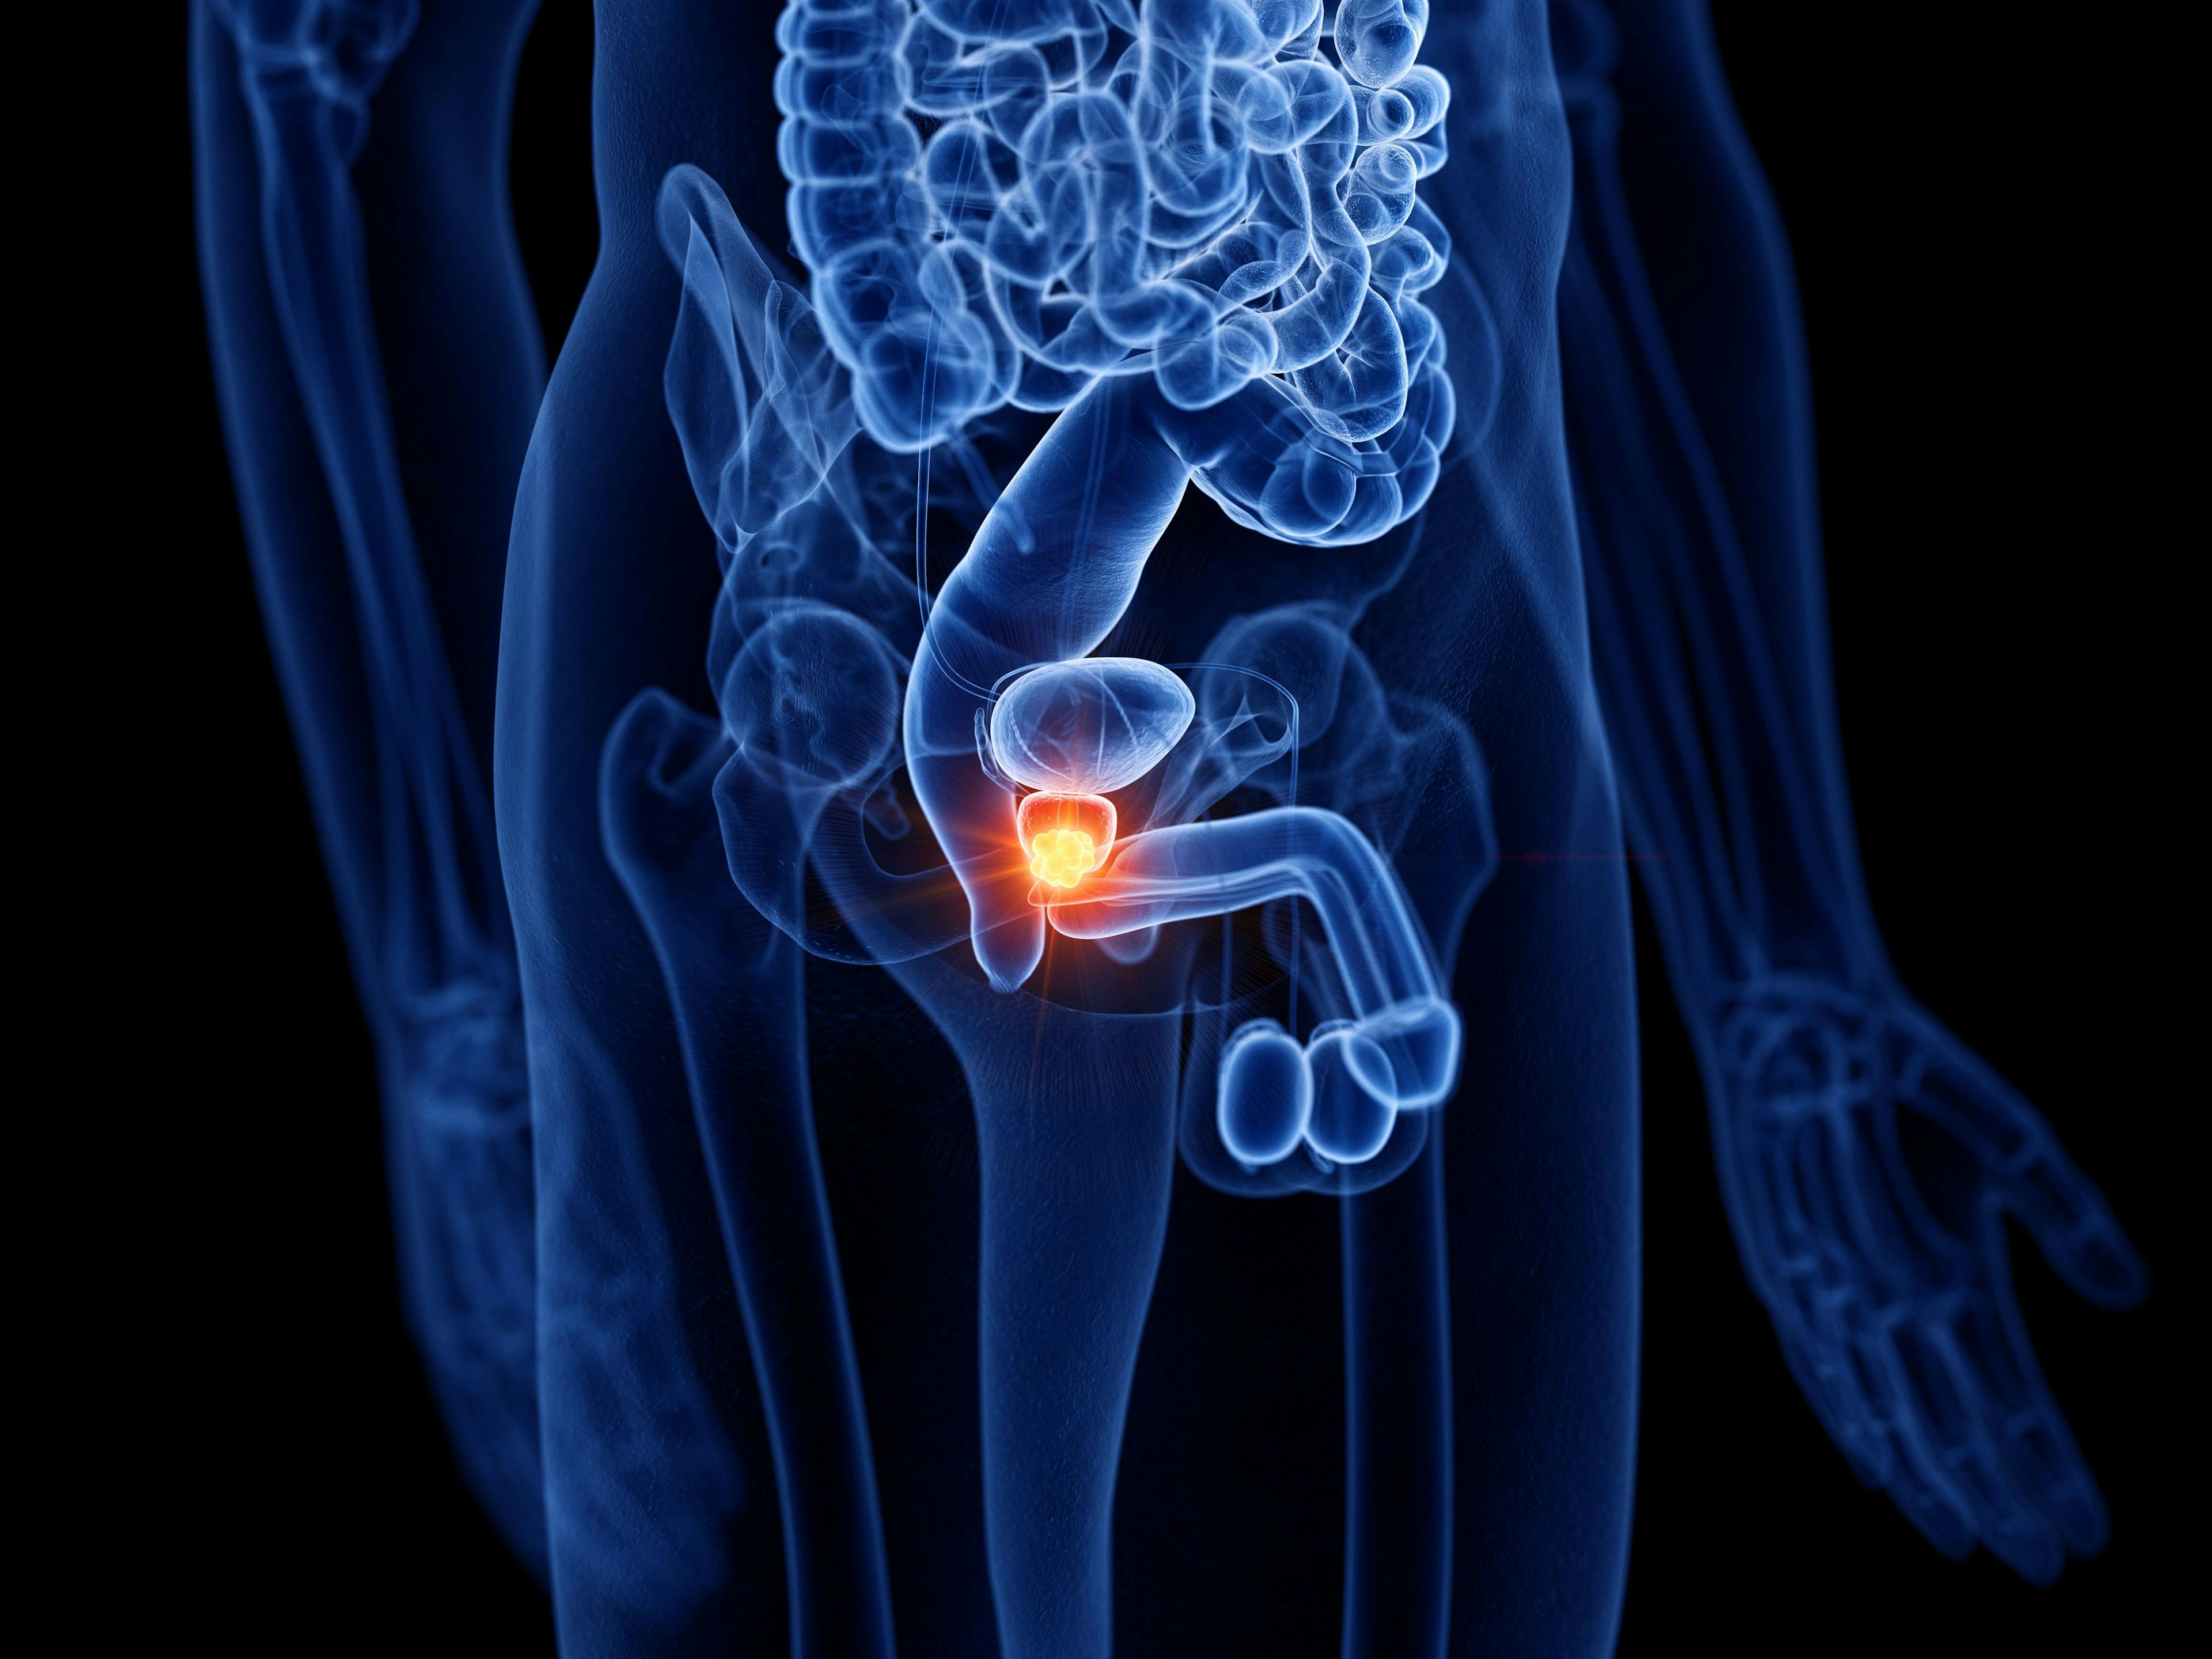 3d rendered medically accurate illustration of prostate cancer: © SciePro - stock.adobe.com